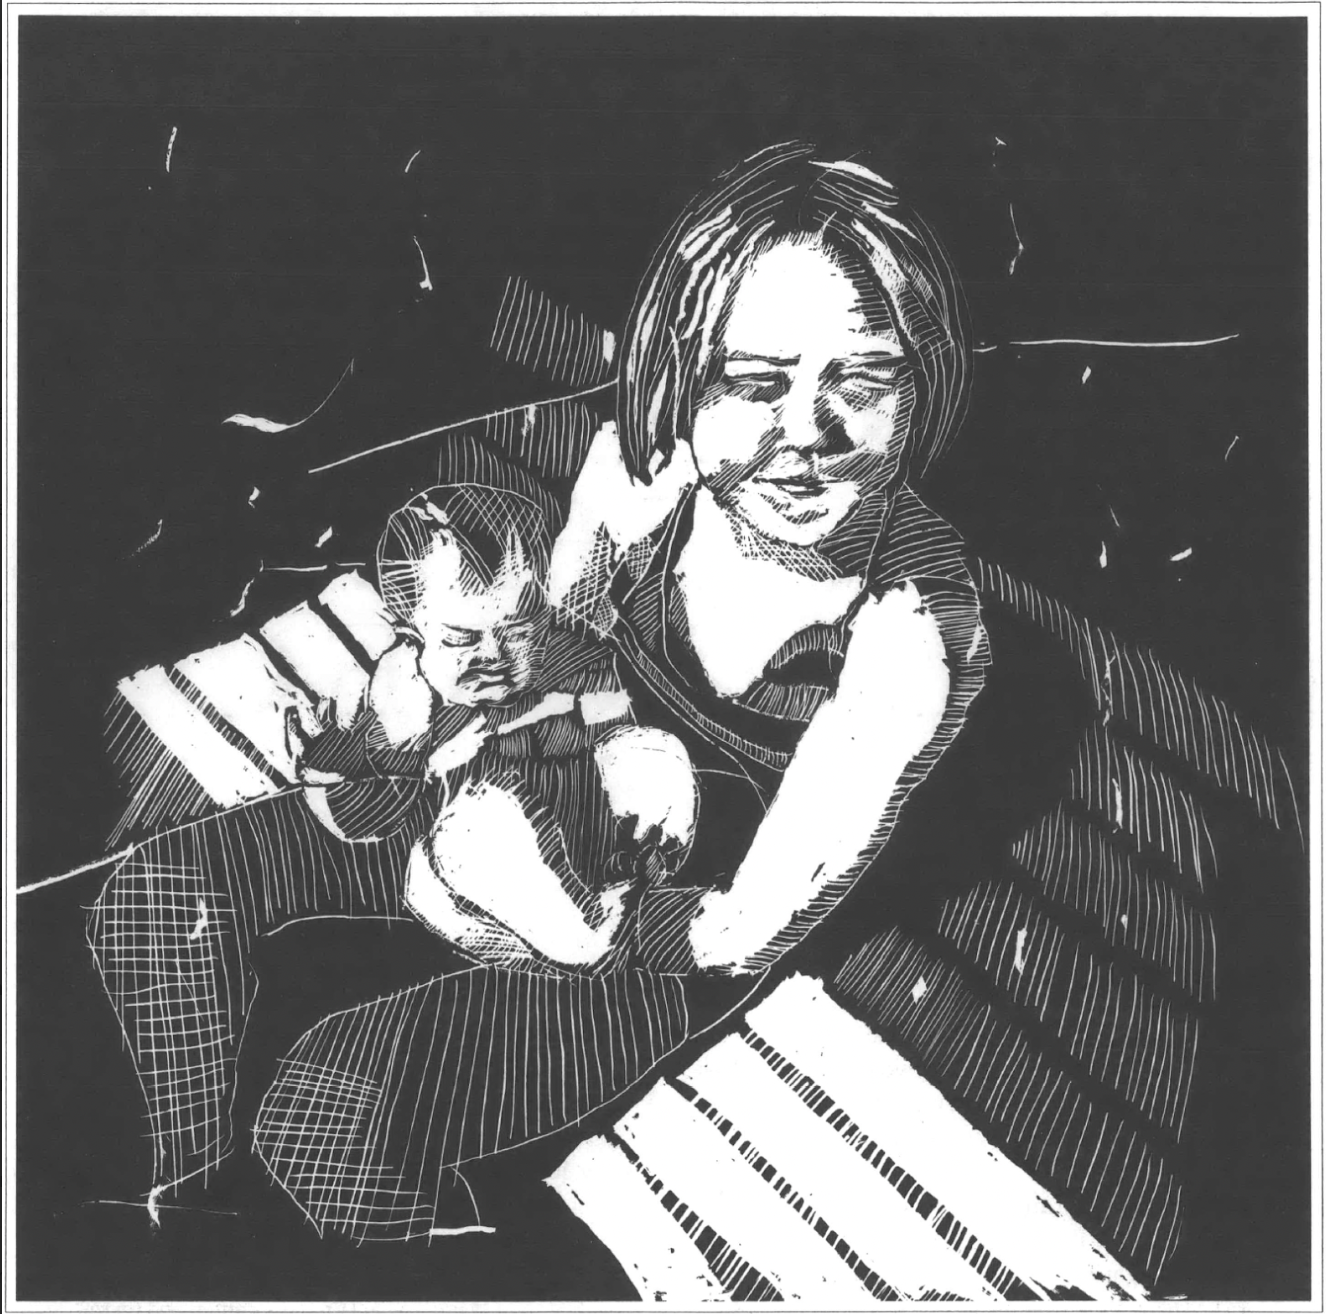 illustration of woman holding baby